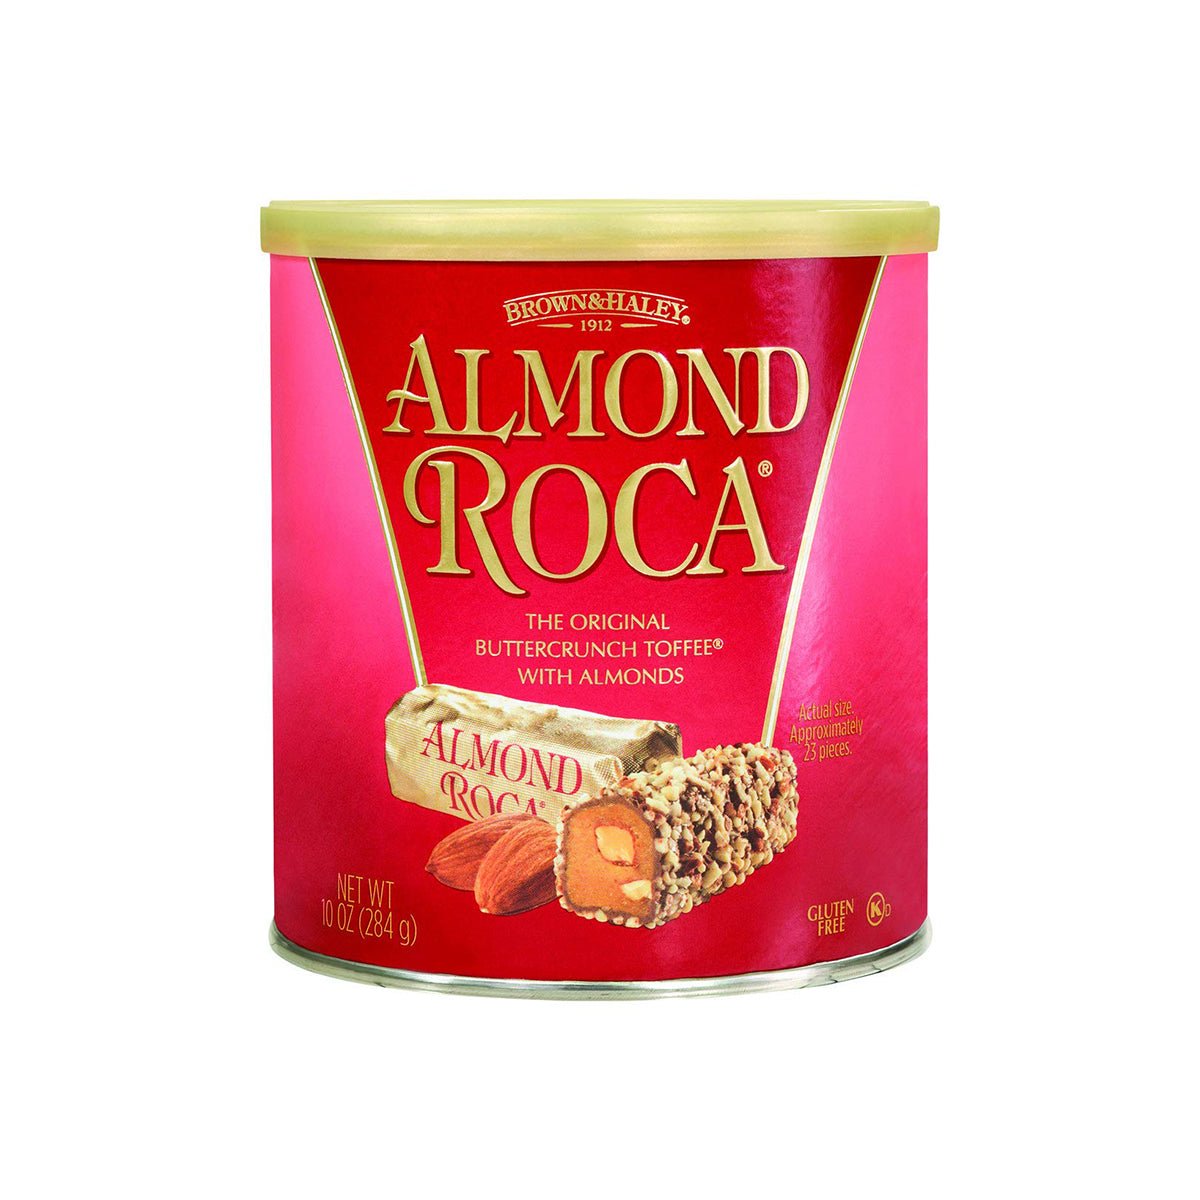 almond roca the original buttercrunch toffee with almonds - 10oz